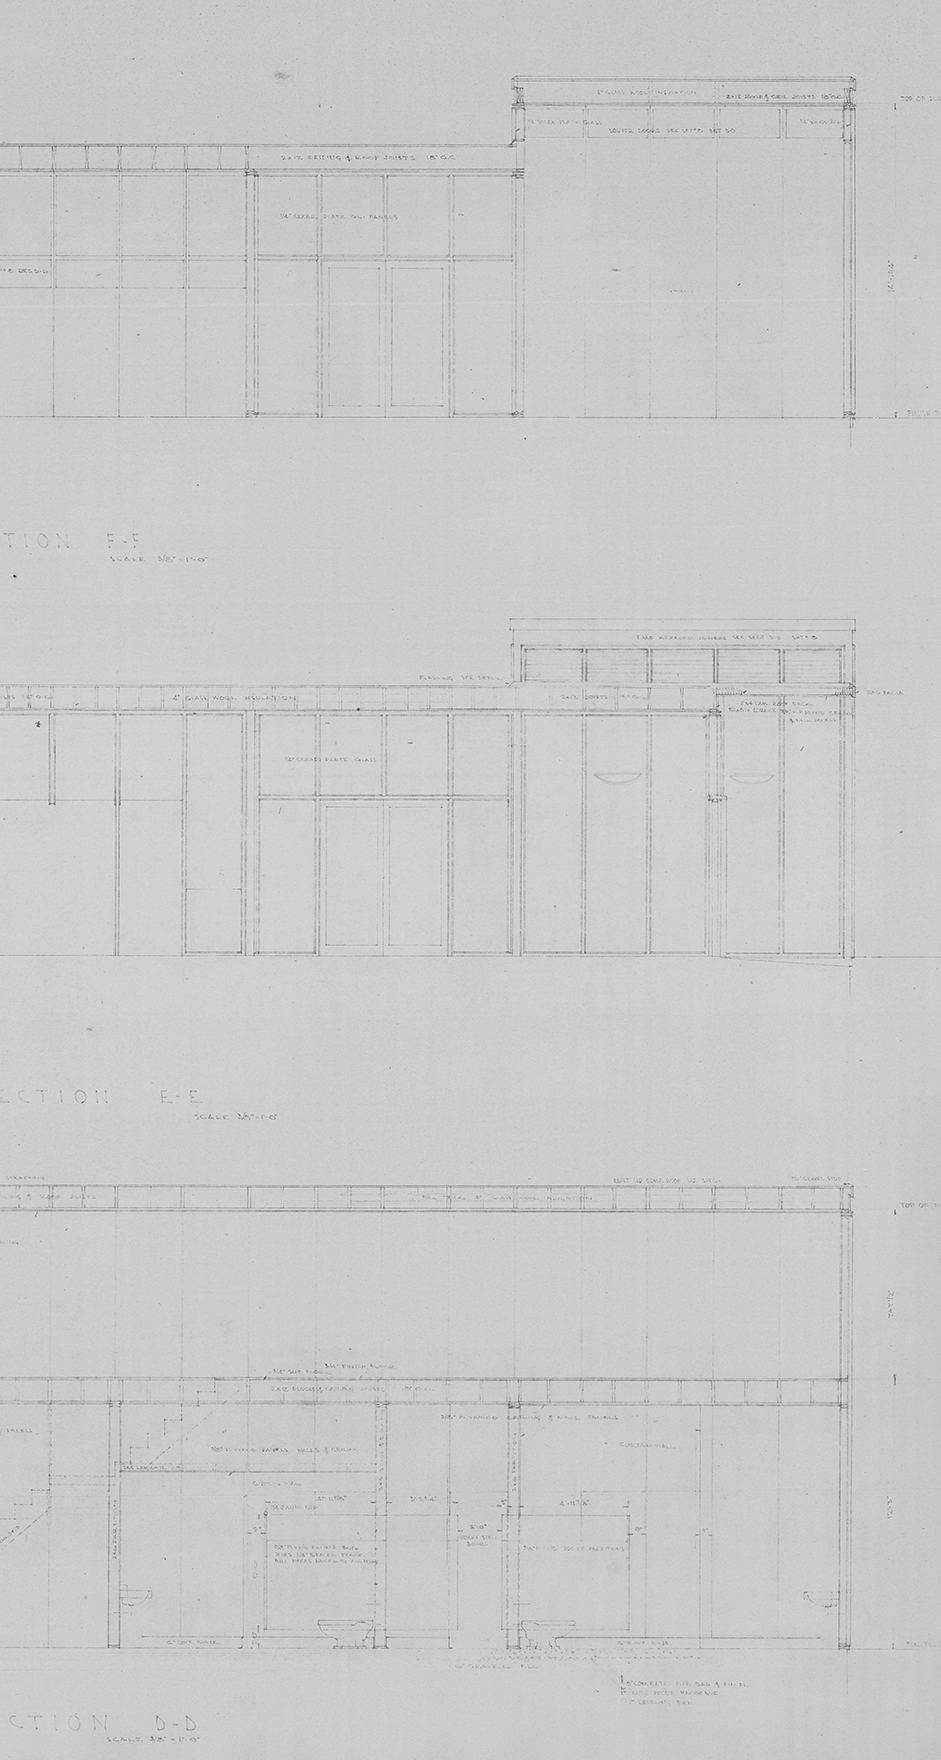 Section Sketch of House, John Yeon architectural drawings, 1934-1976